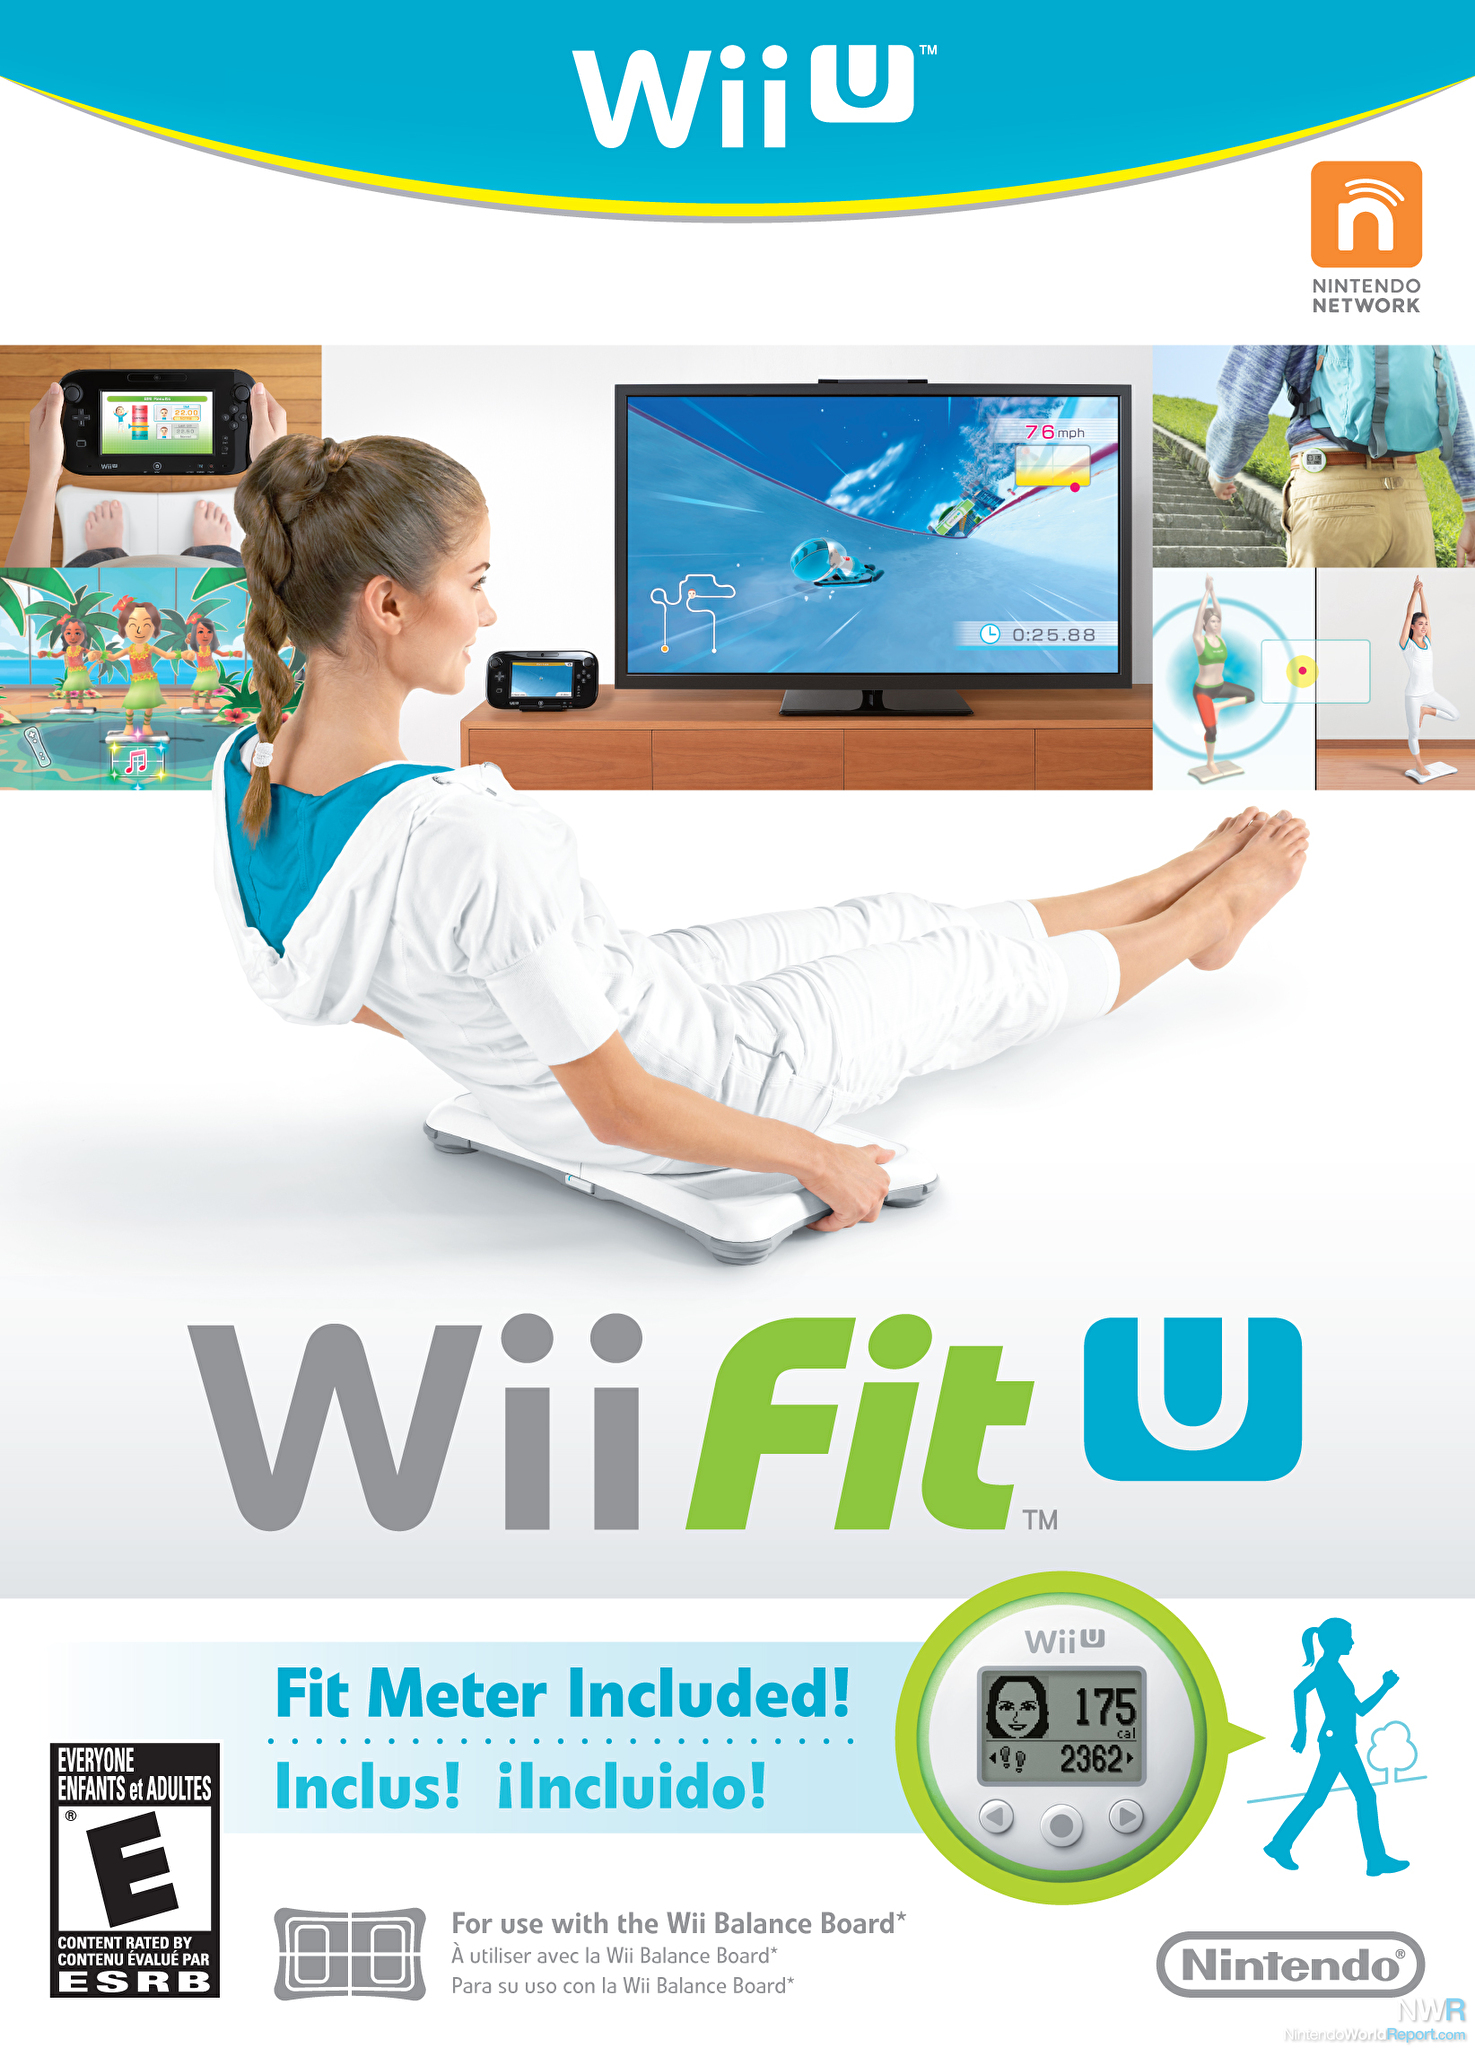 Wii Fit U Hands-on Preview - Hands-on Preview - Nintendo World Report